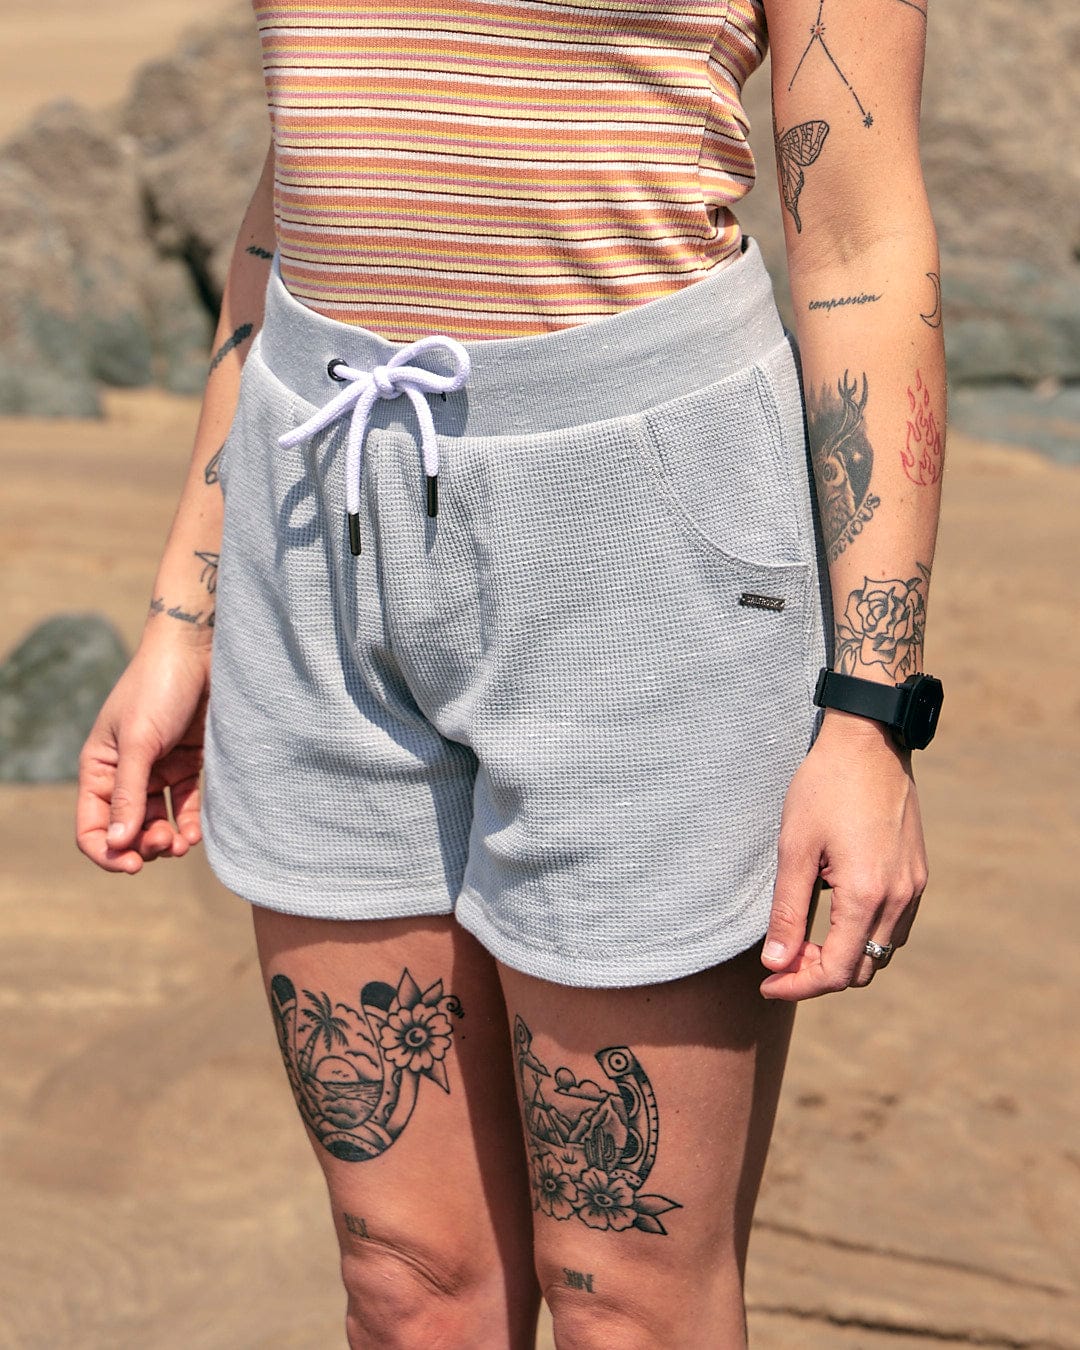 A woman with tattoos standing on a beach wearing Rosalin - Womens Sweat Shorts in Light Grey by Saltrock.